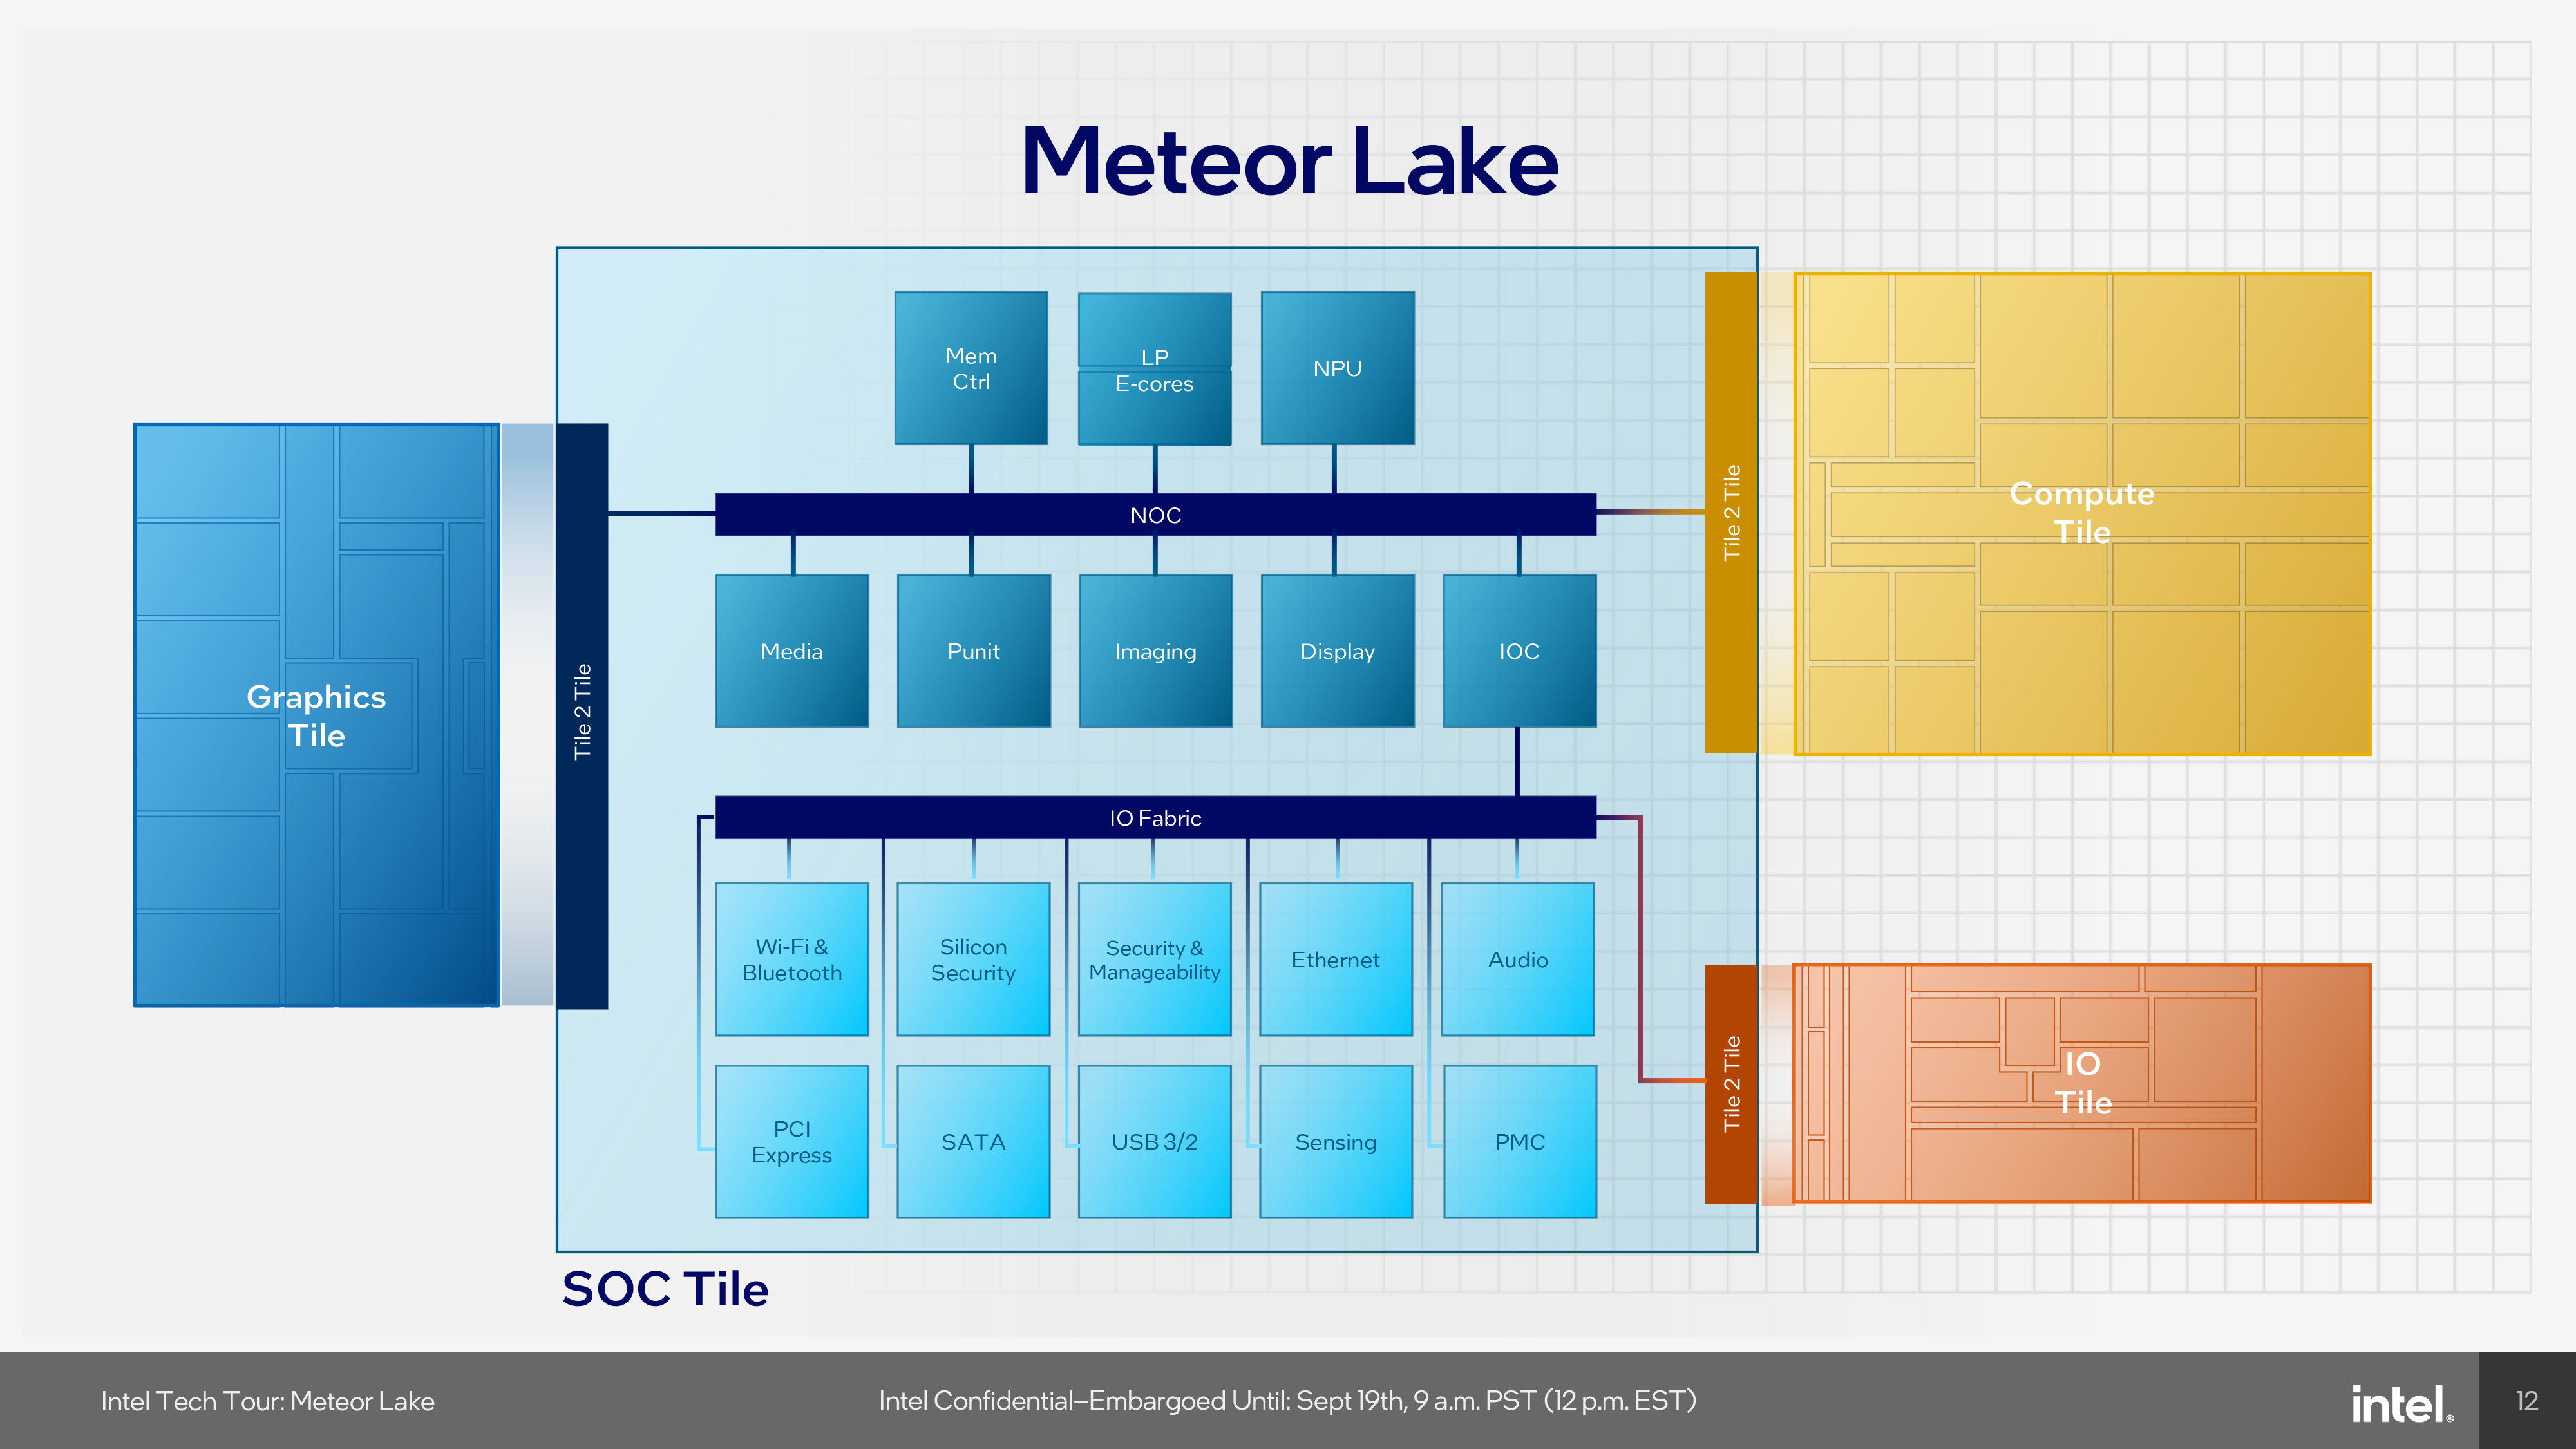 Meteor Lake chip layout with Graphics Tile, SoC Tile, IO Tile, and Compute Tile.